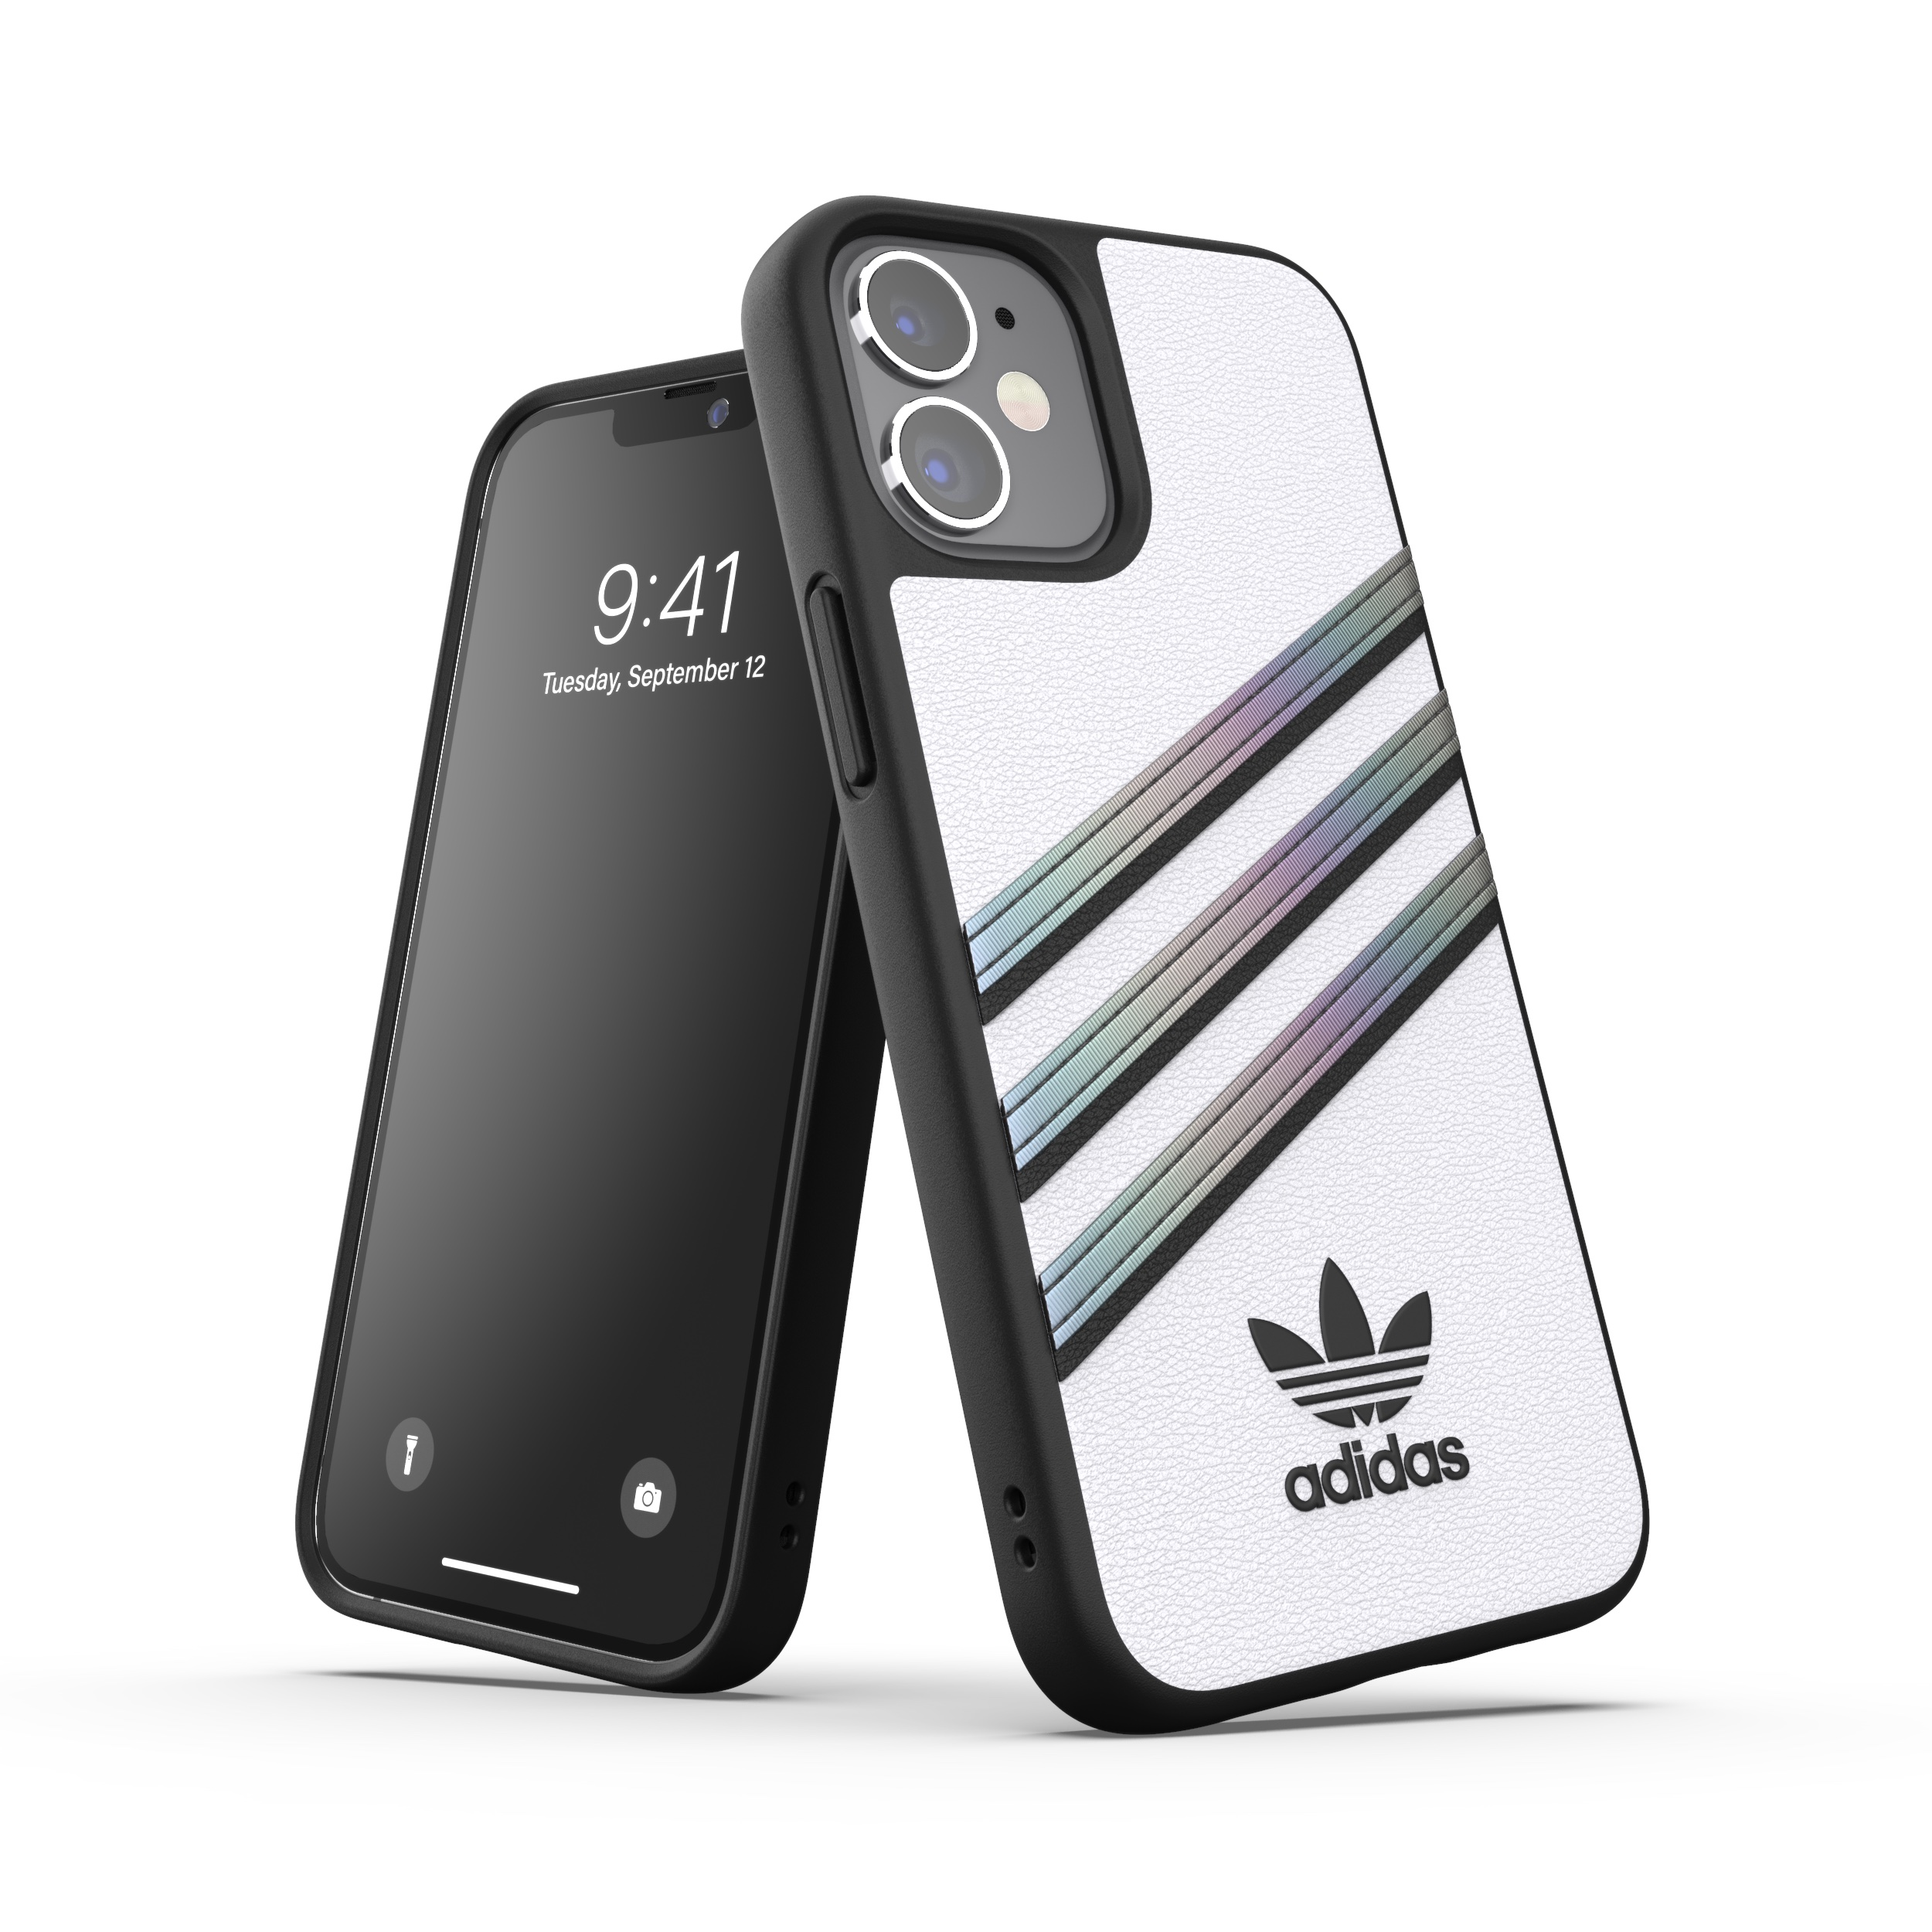 APPLE, MINI, PU 12 ADIDAS Case IPHONE Woman, Moulded Backcover, WHITE